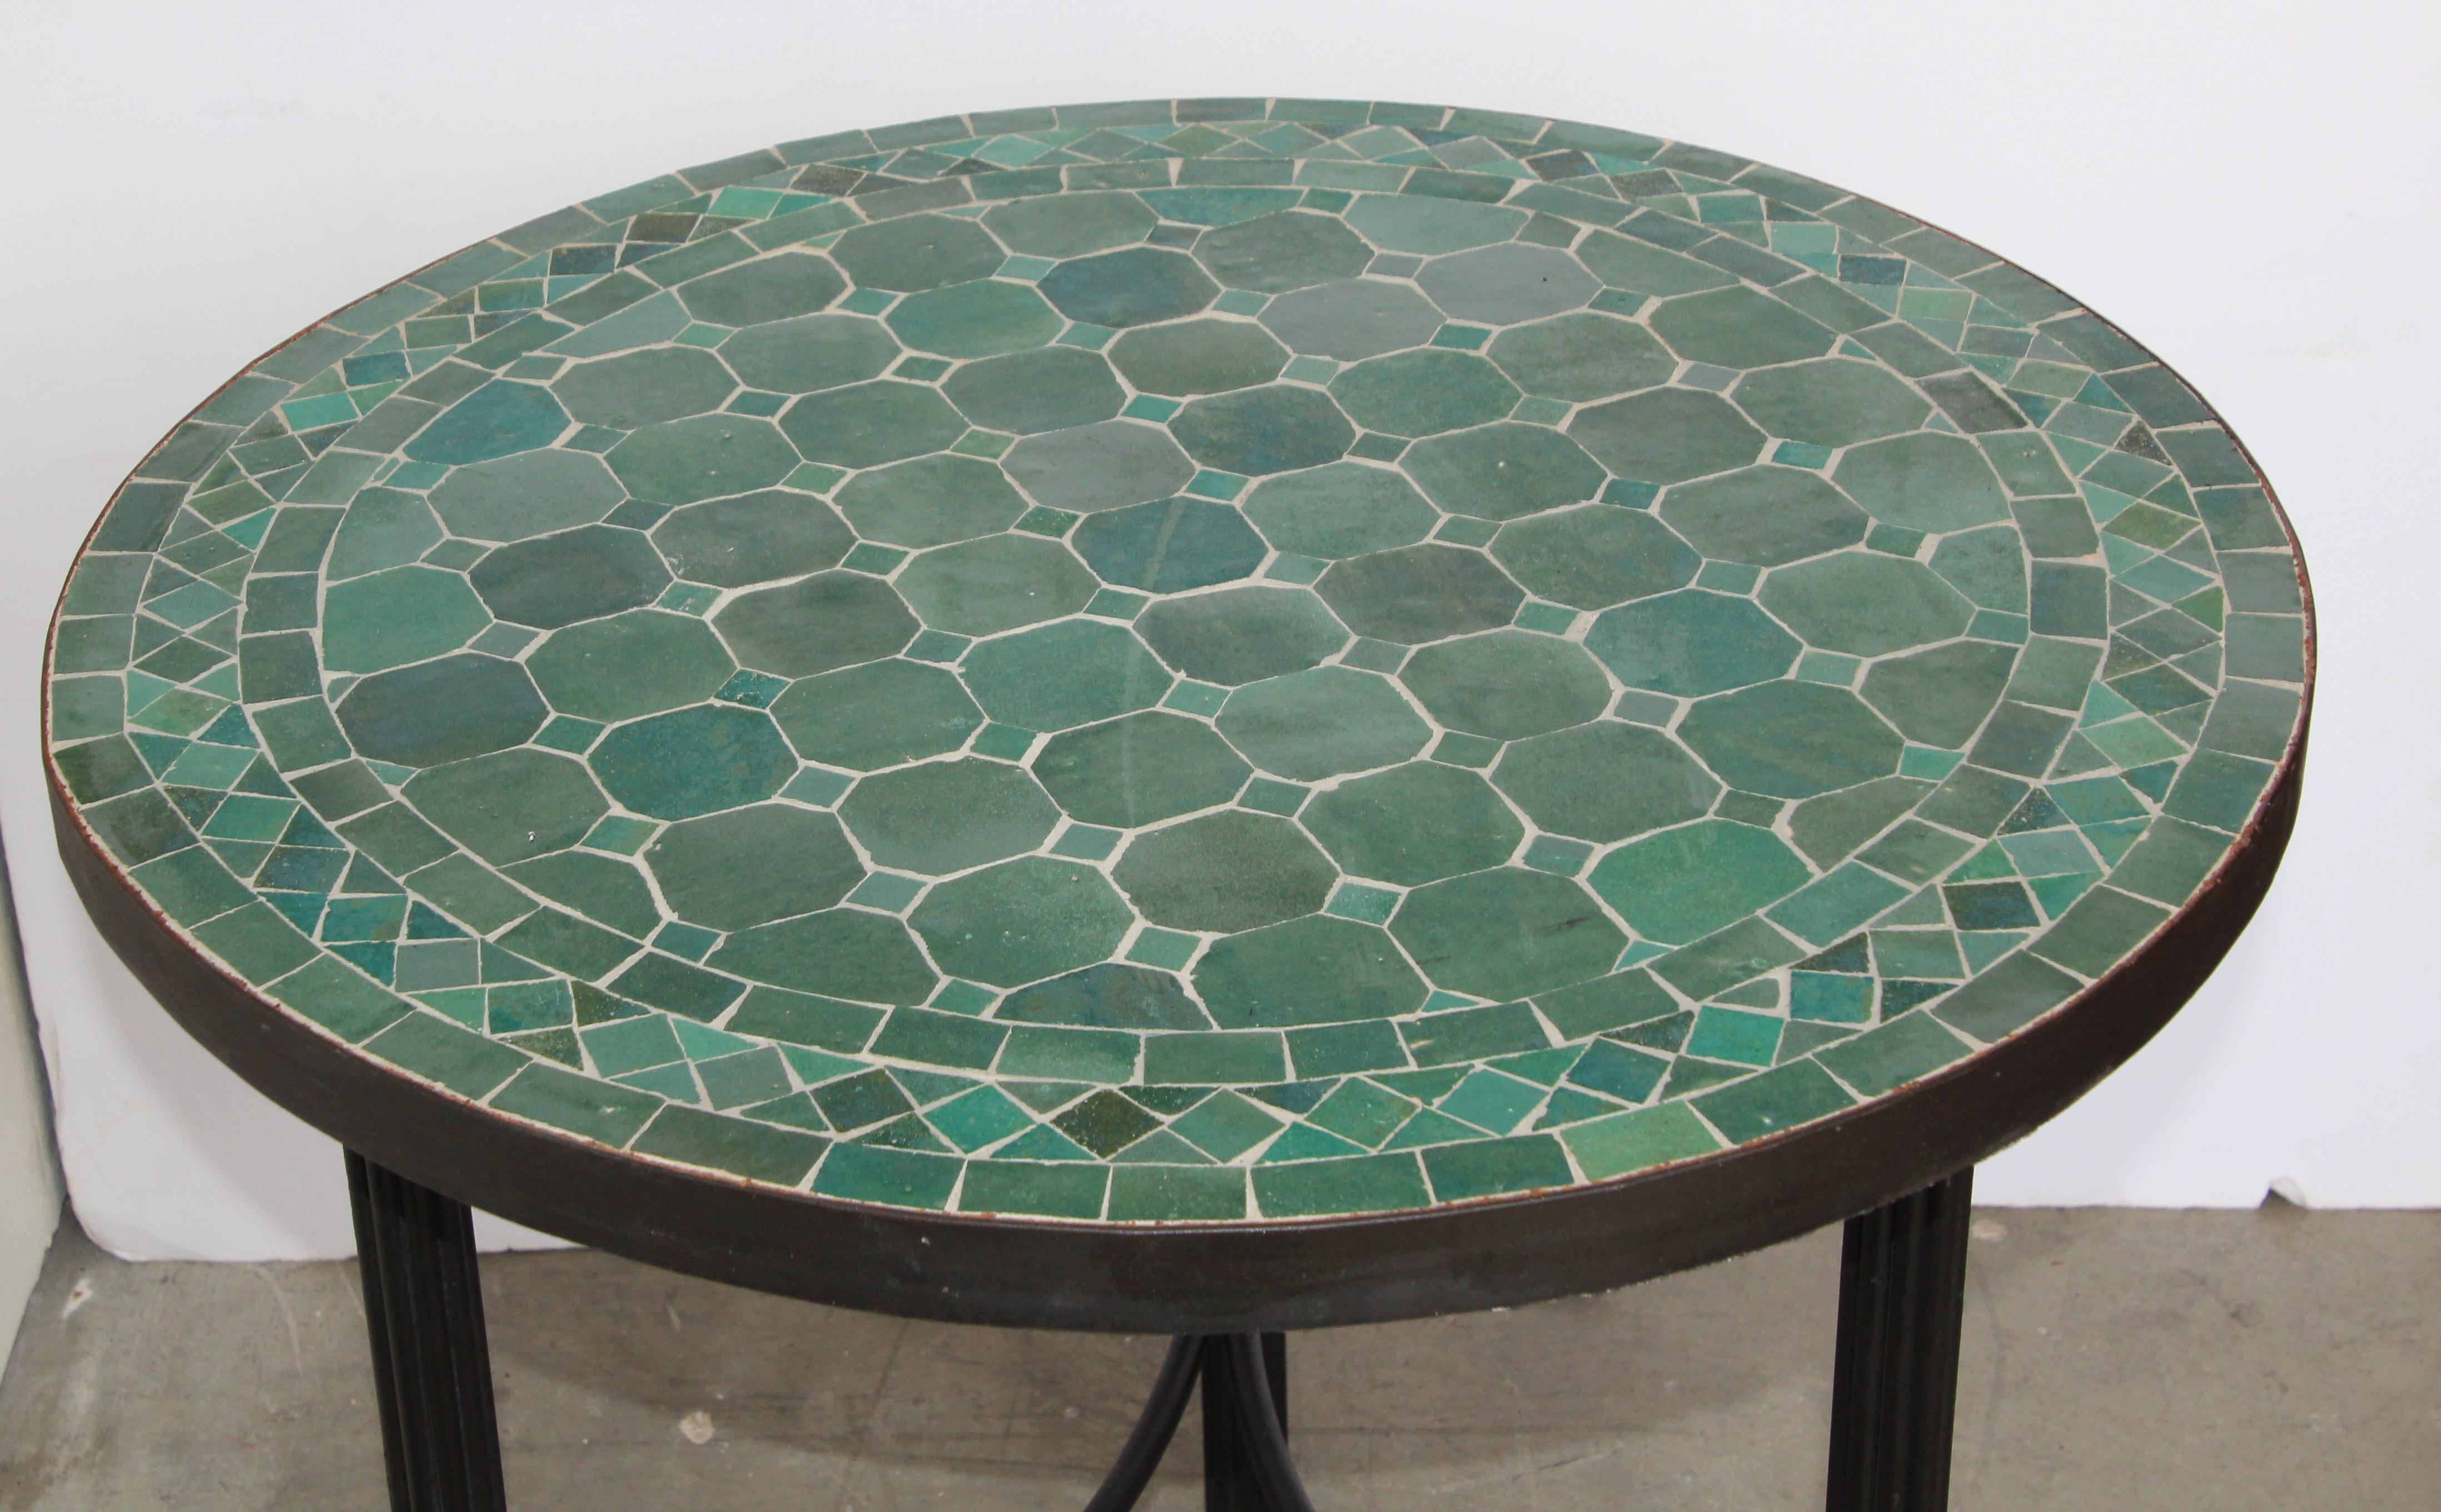 20th Century Moroccan Mosaic Fez Tiles Green Colors Side Table